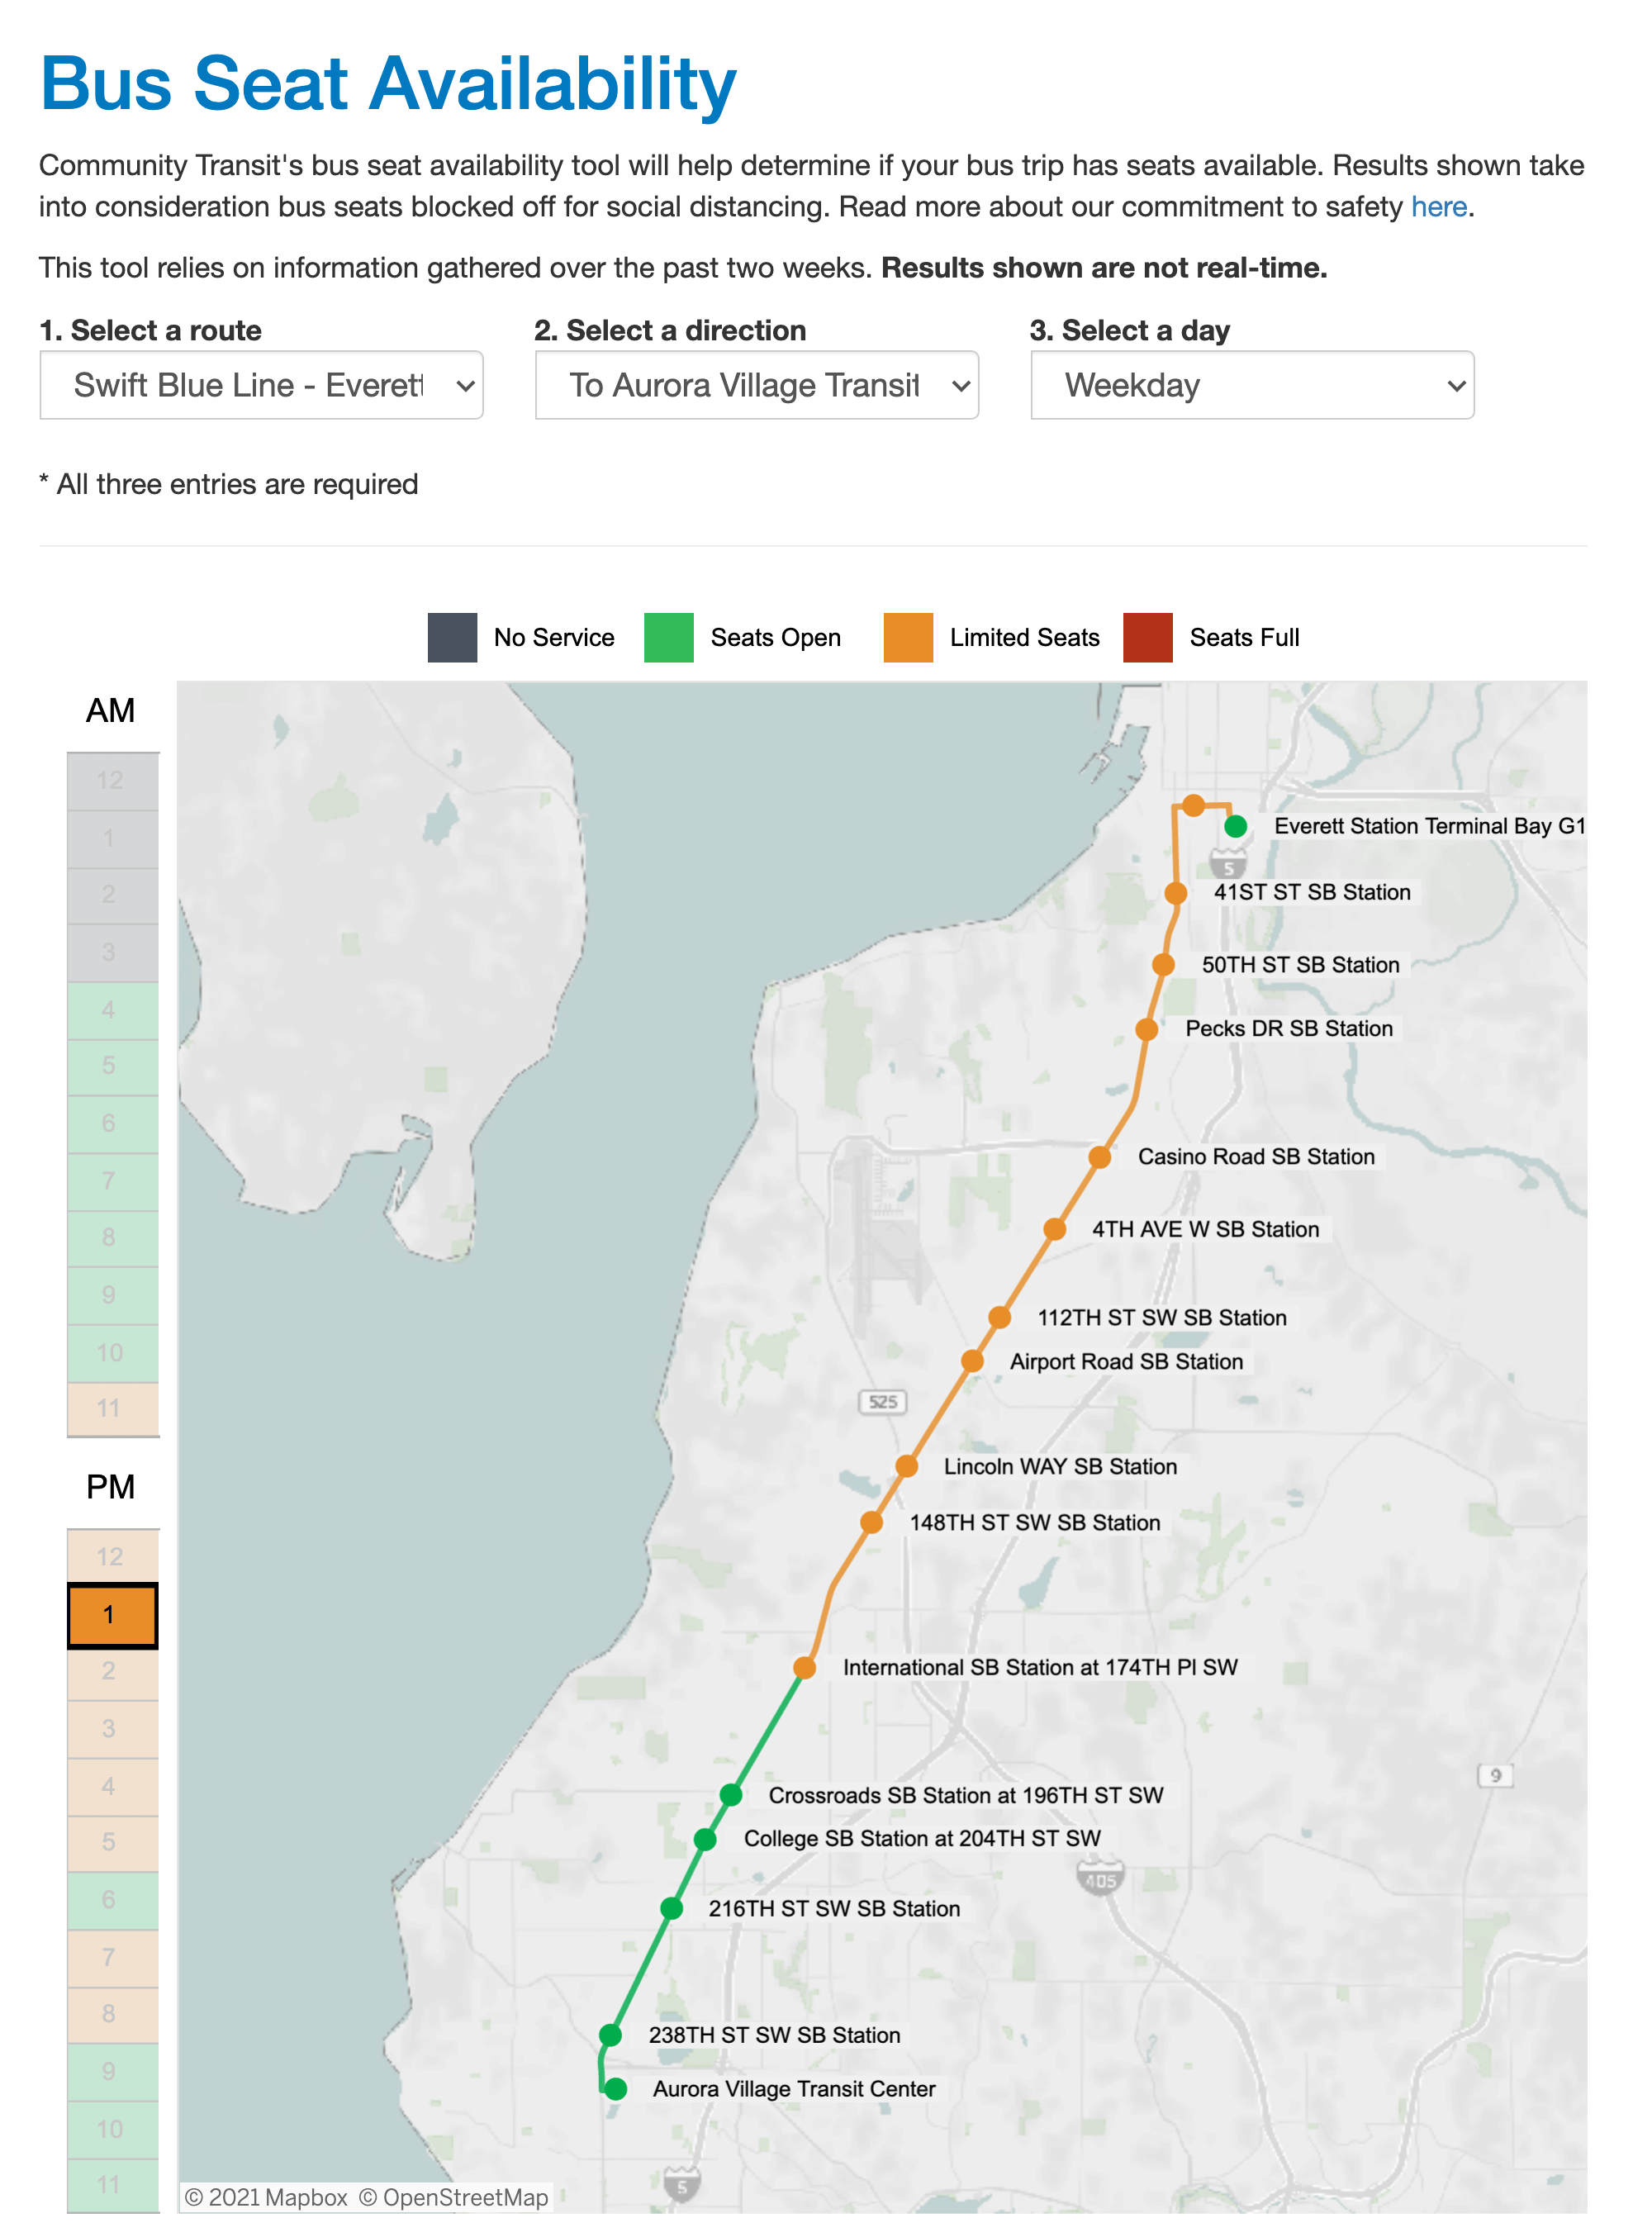 Screenshot of Bus Seat Availability Tool showing Swift Bus at 1 p.m.